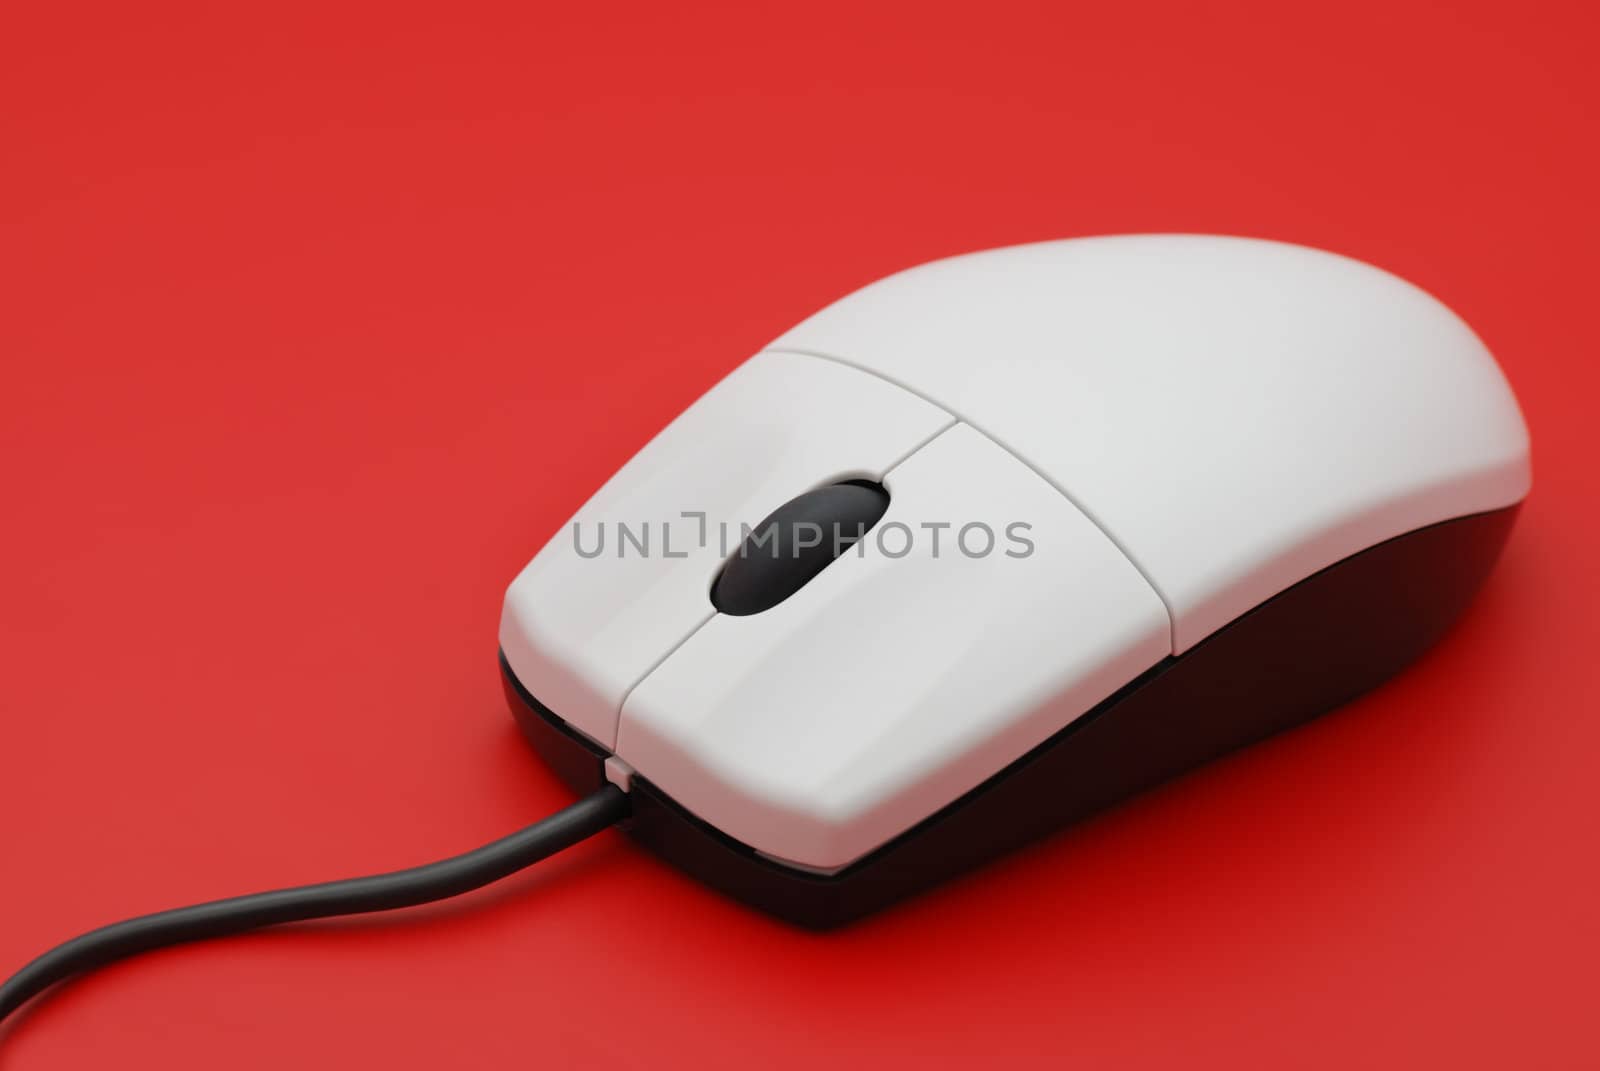 The computer mouse by galdzer